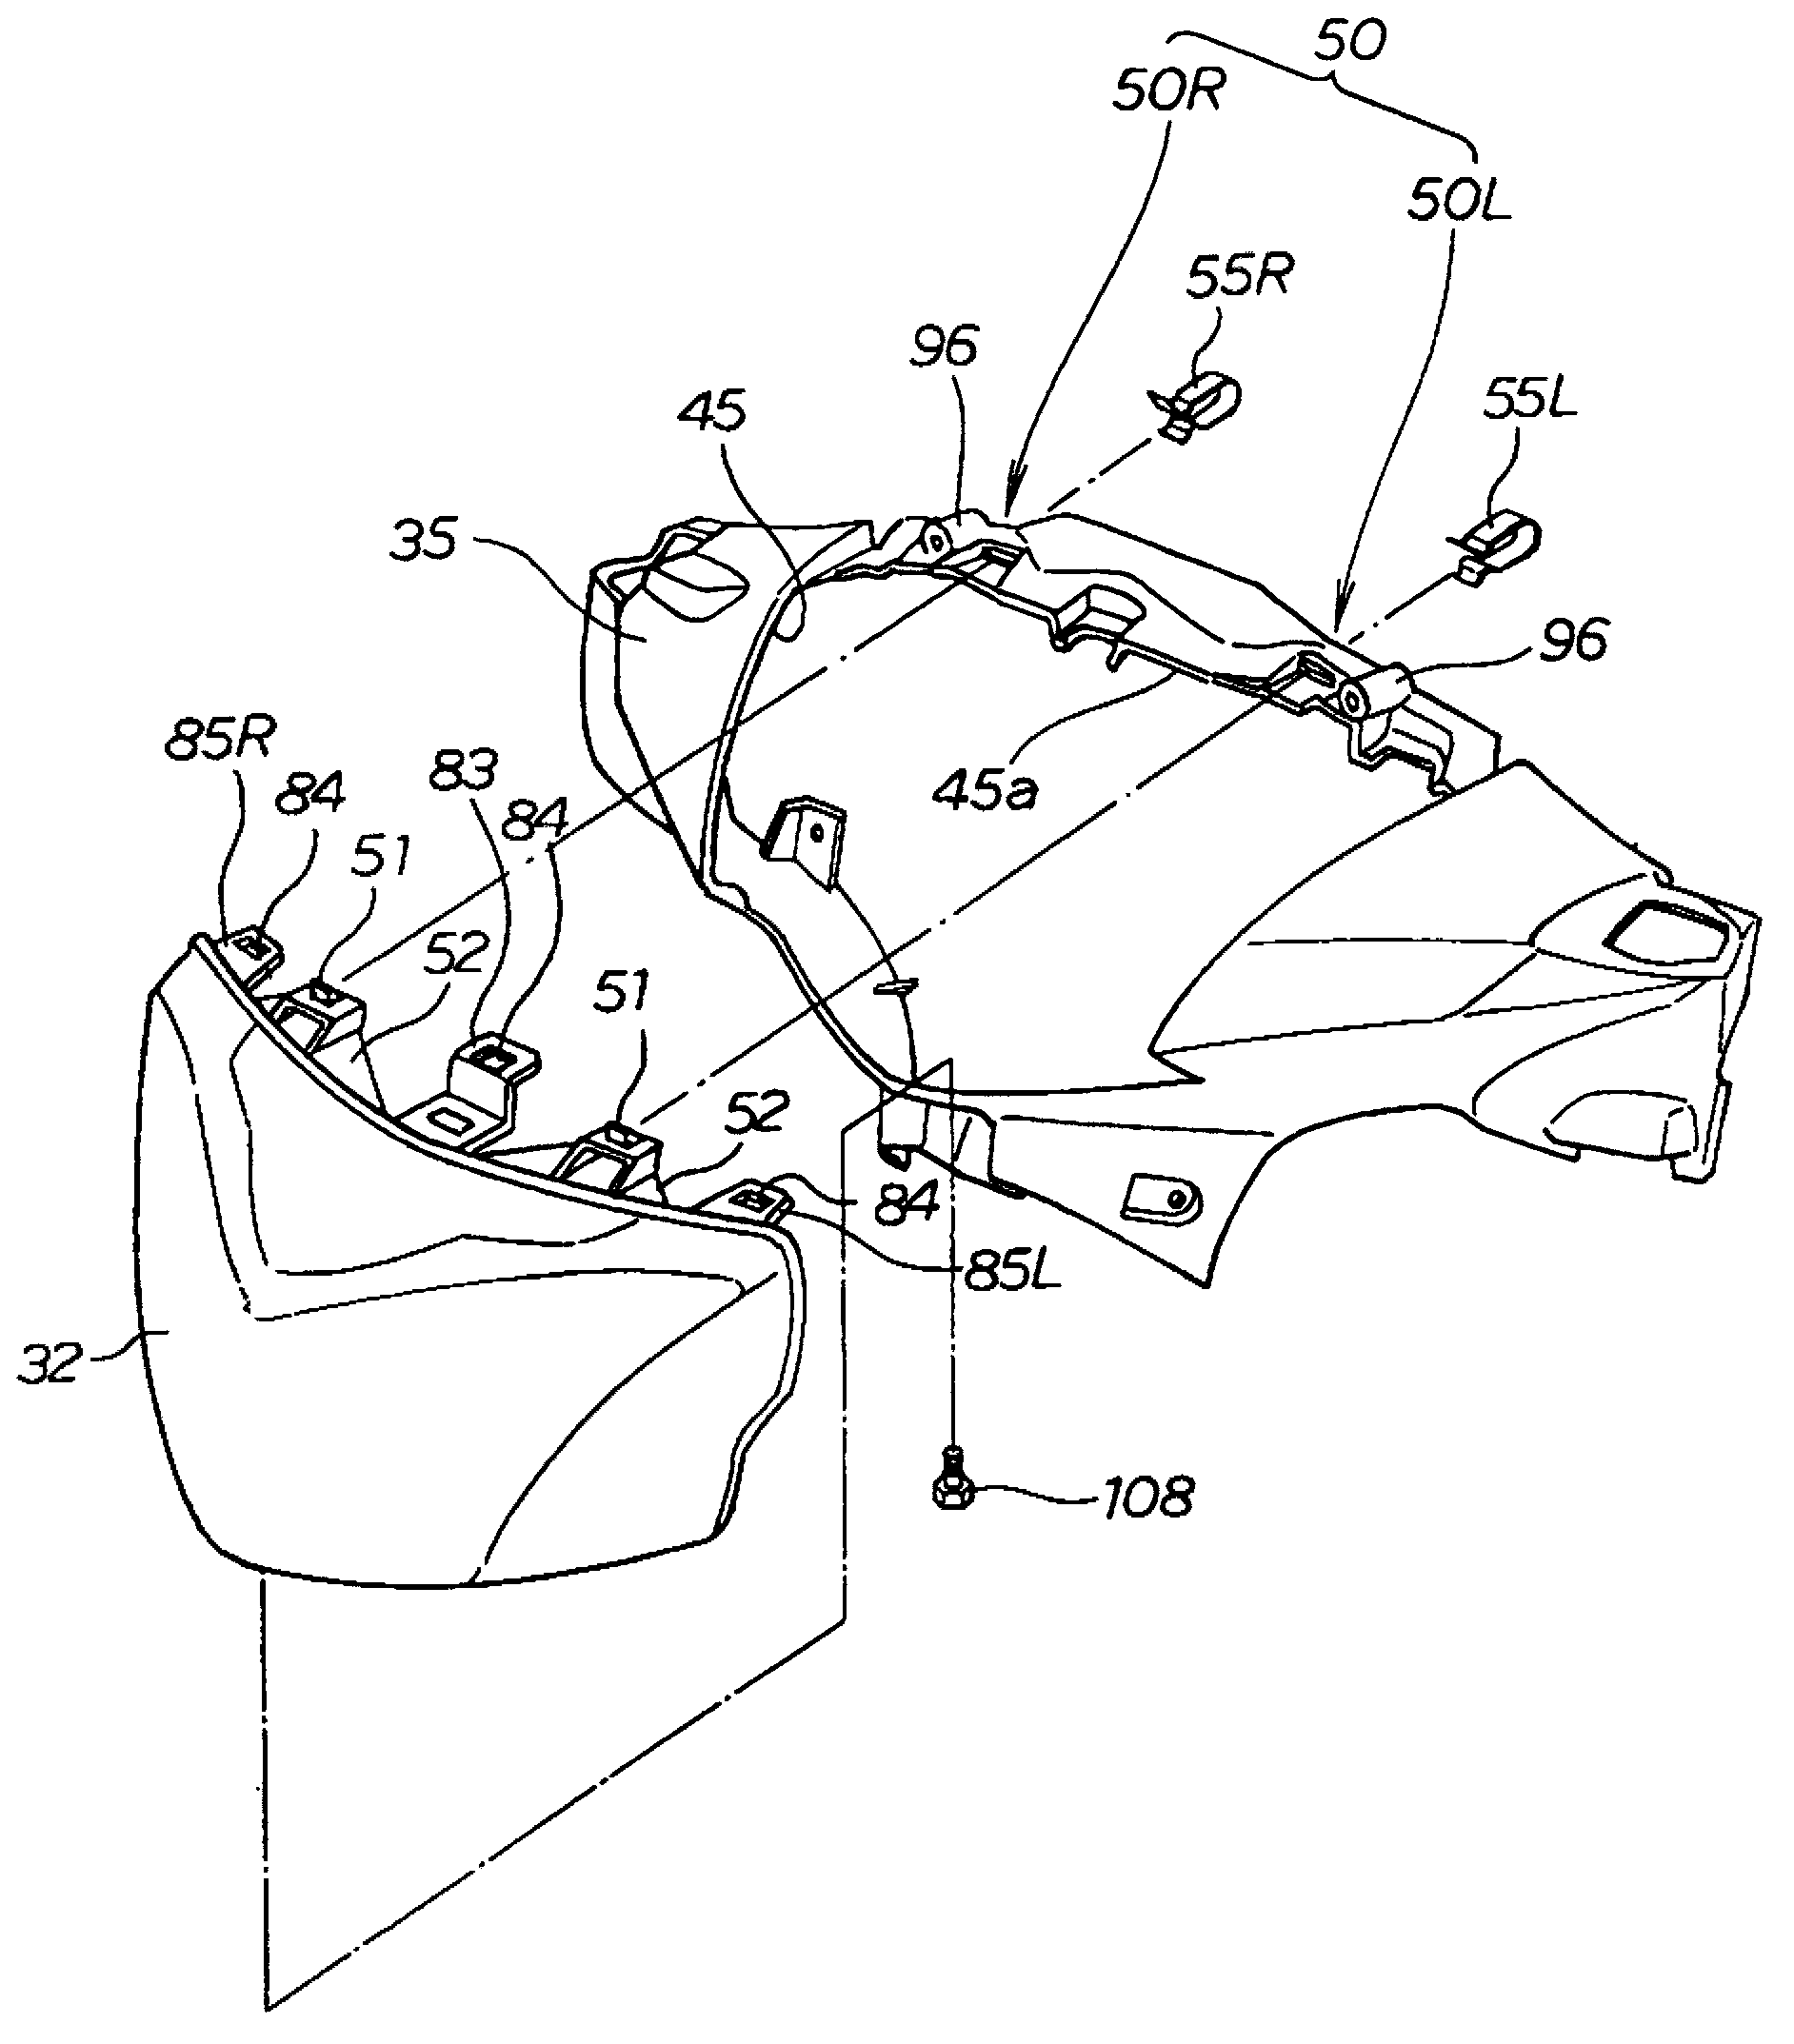 Motorcycle handlebar cover device